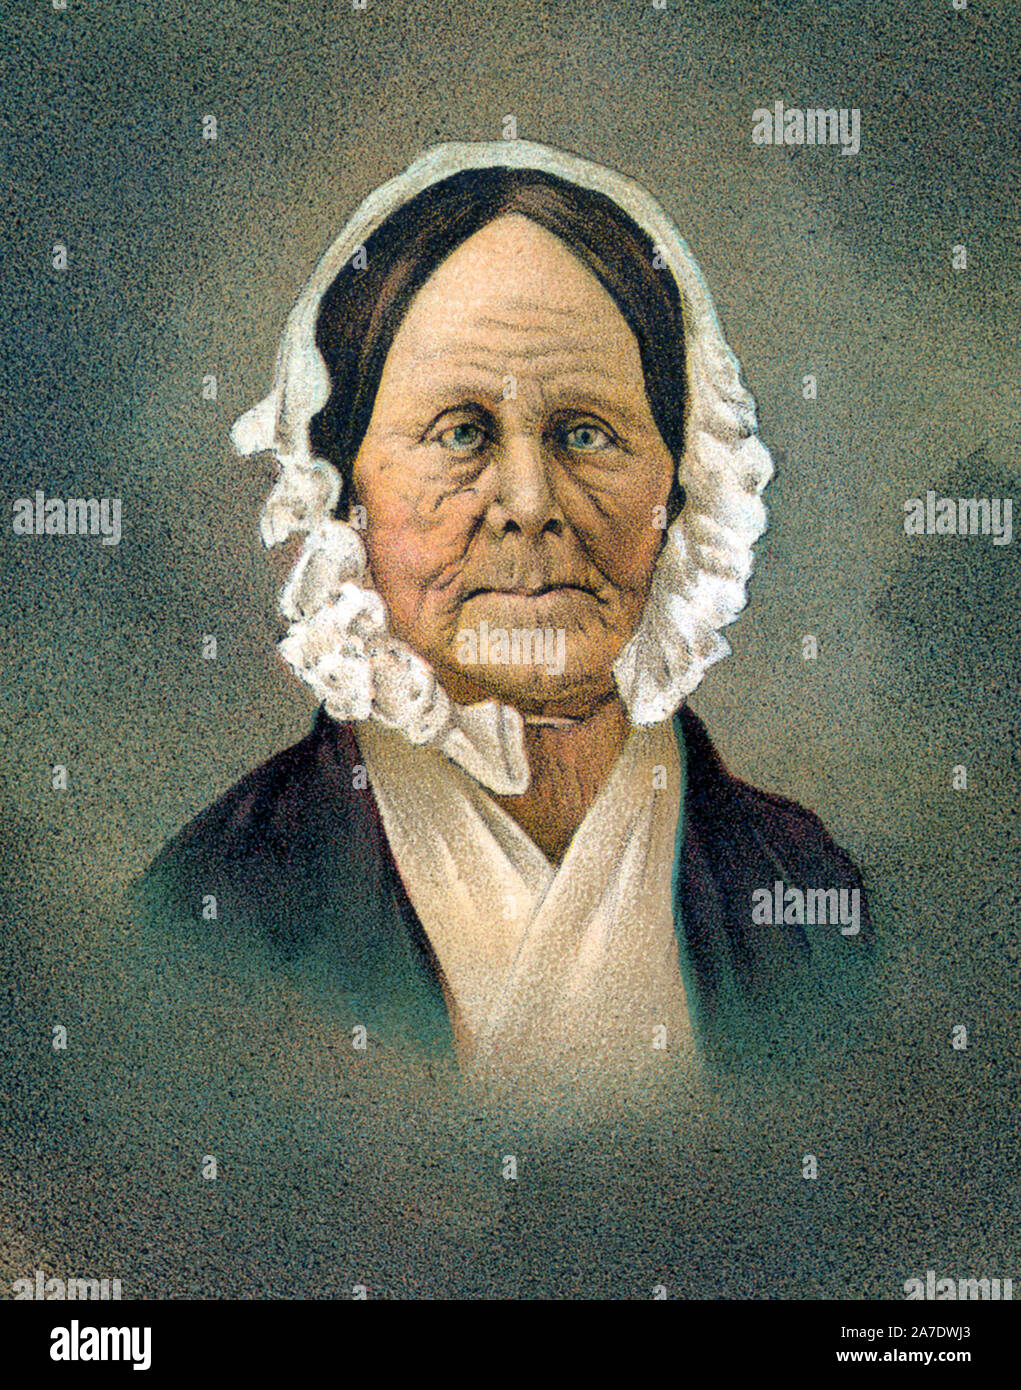 Vintage portrait of Barbara Frietchie (1766 – 1862), the elderly Unionist who became part of American Civil War folklore thanks to a popular poem by John Greenleaf Whittier. Legend has it that Frietchie (also spelt Fritchie or Frietschie) waved a Union flag from her attic window at occupying Confederate forces in Frederick, Maryland, in September 1862 and declared: 'Shoot, if you must, this old gray head, but spare your country's flag.' Detail from a print circa 1896 by the National Publishing Co / W W Welch of Cleveland. Stock Photo